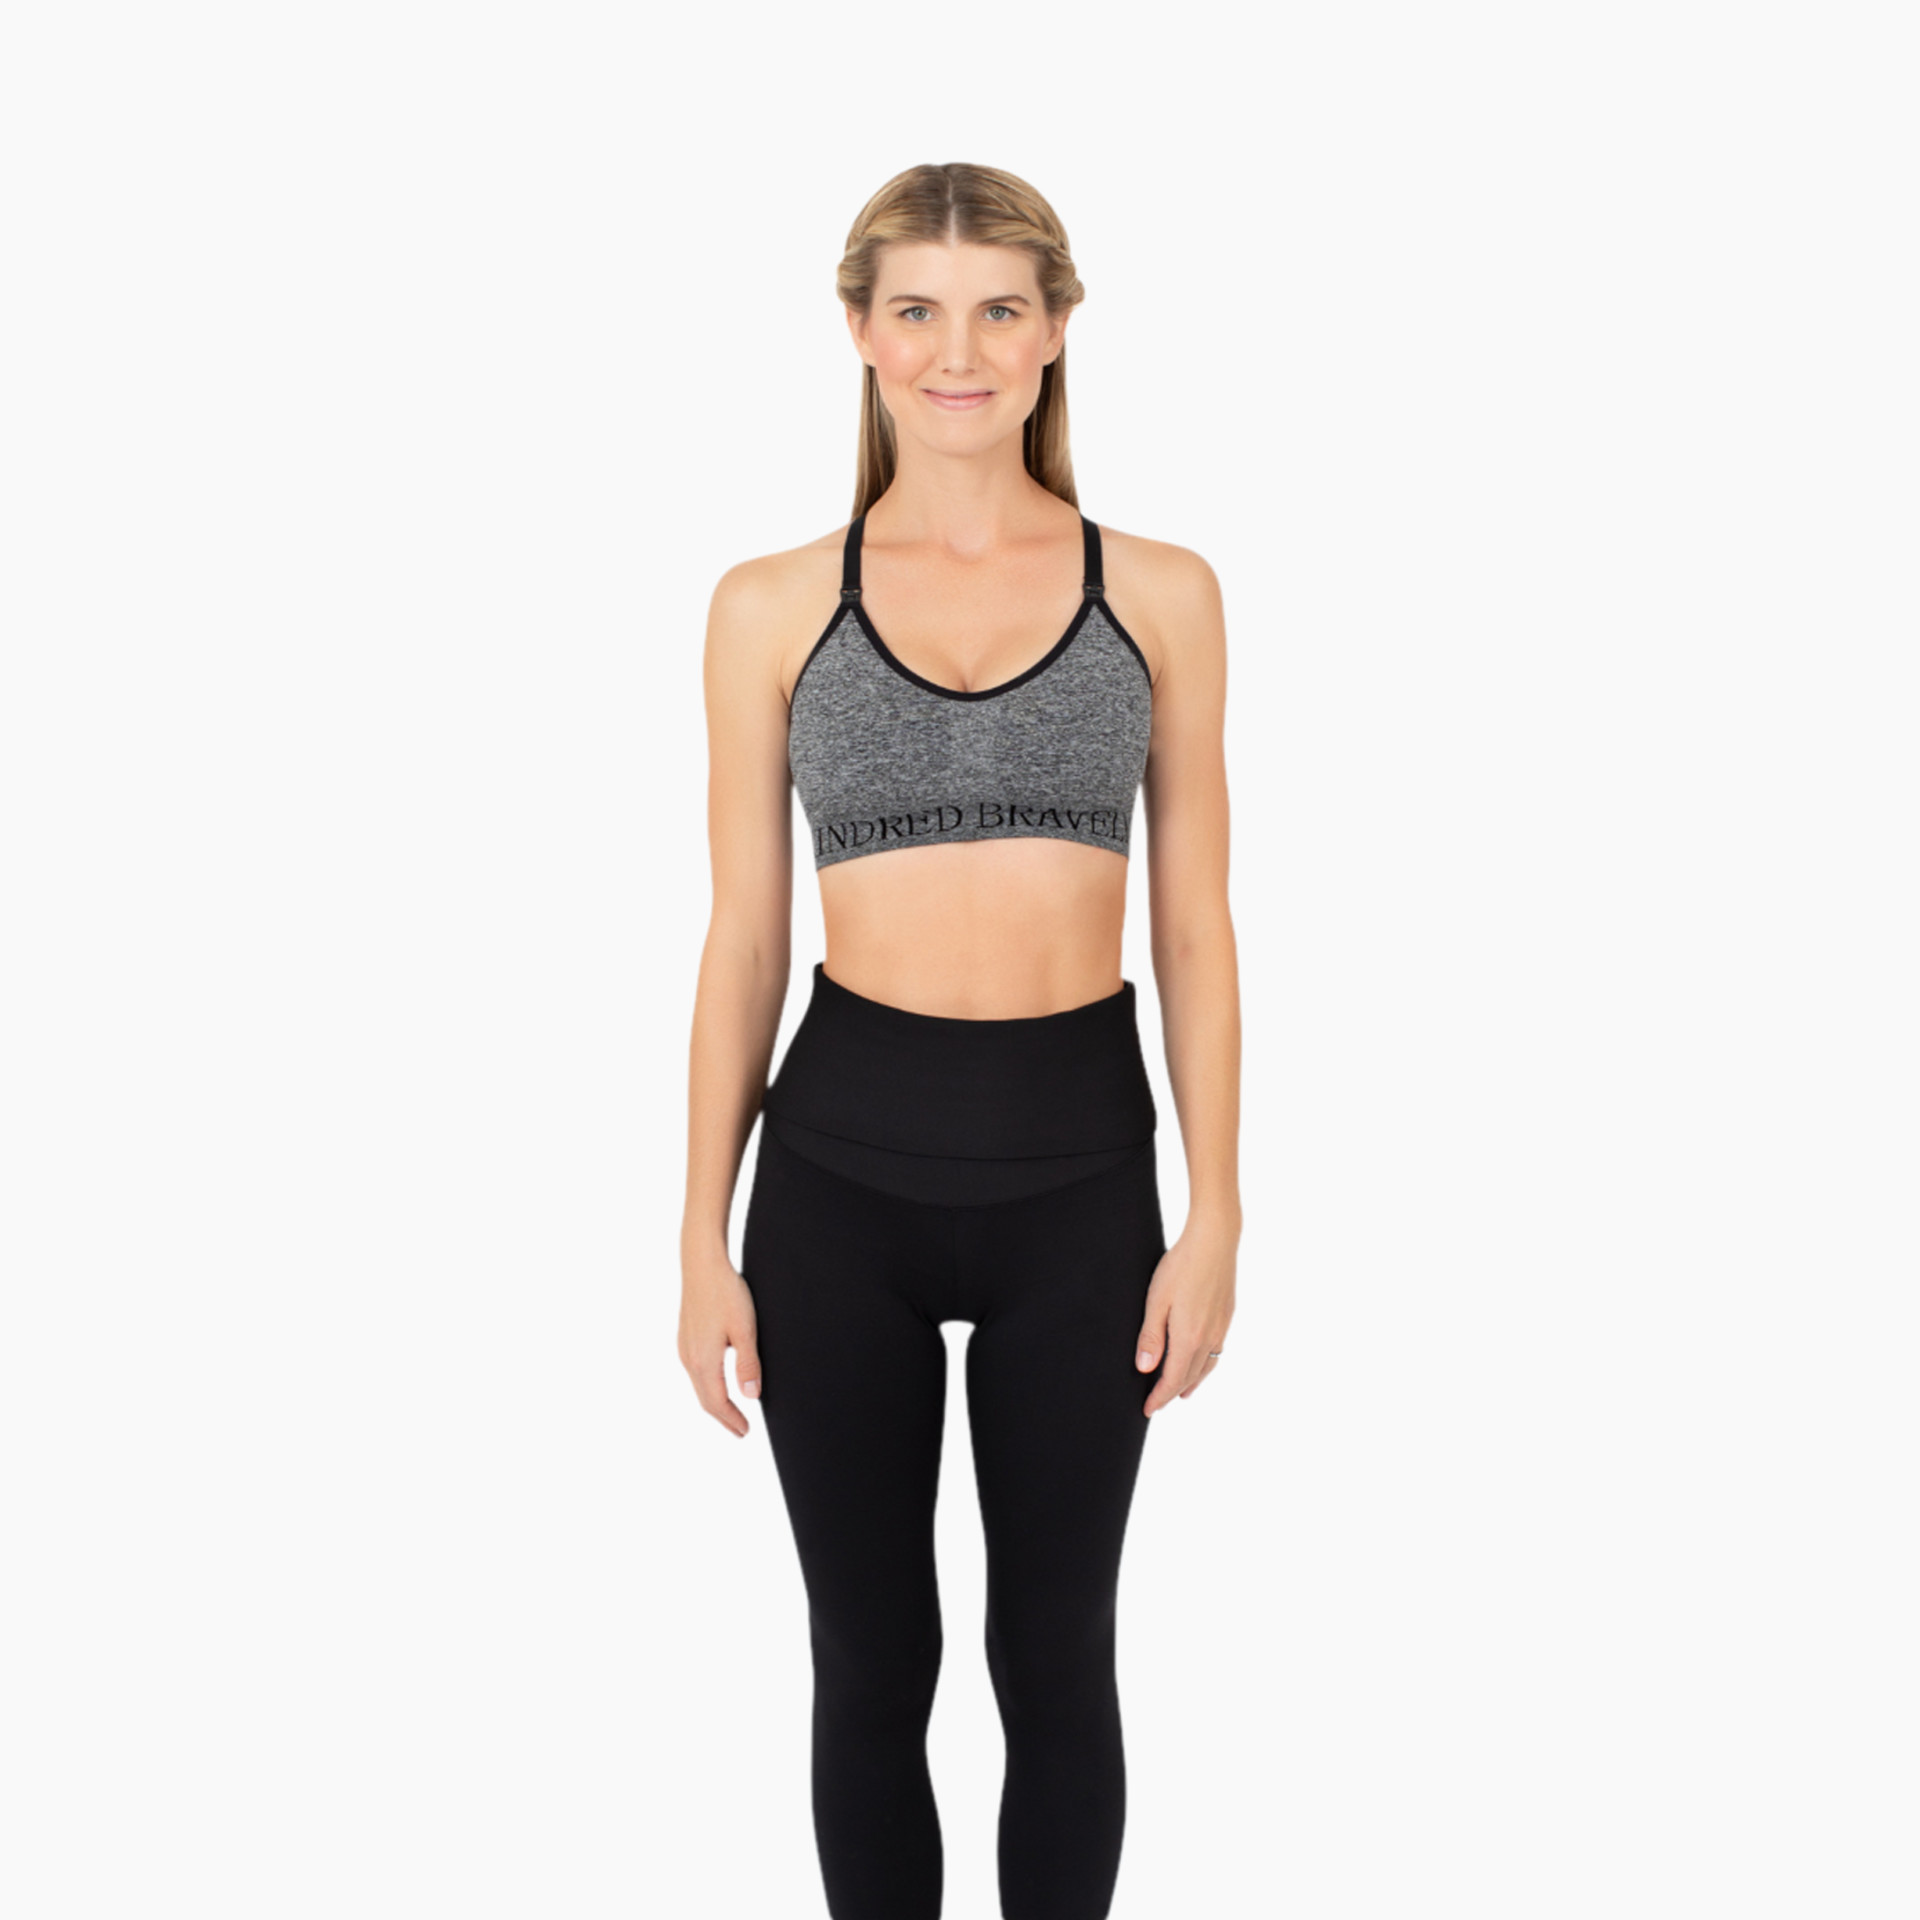 Kindred Bravely Sublime Support Low Impact Nursing & Maternity Sports Bra -  Black, X-Large